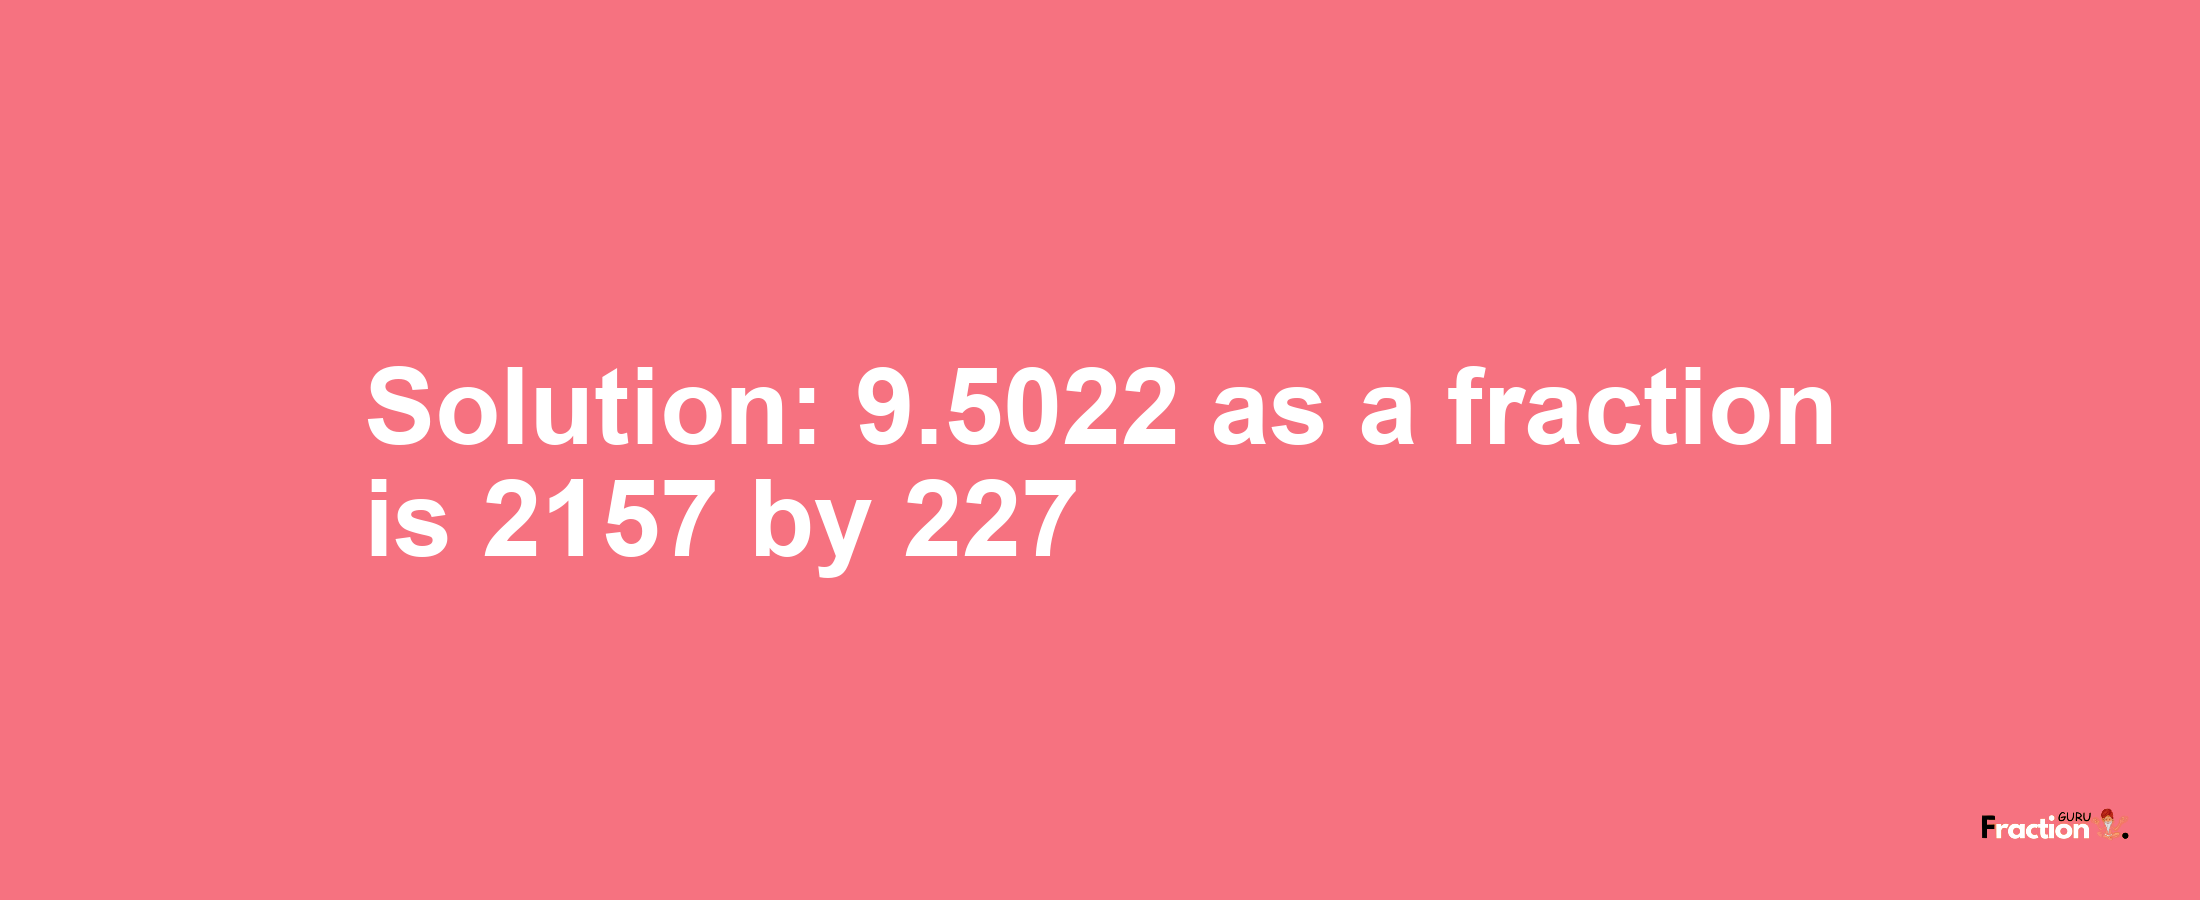 Solution:9.5022 as a fraction is 2157/227